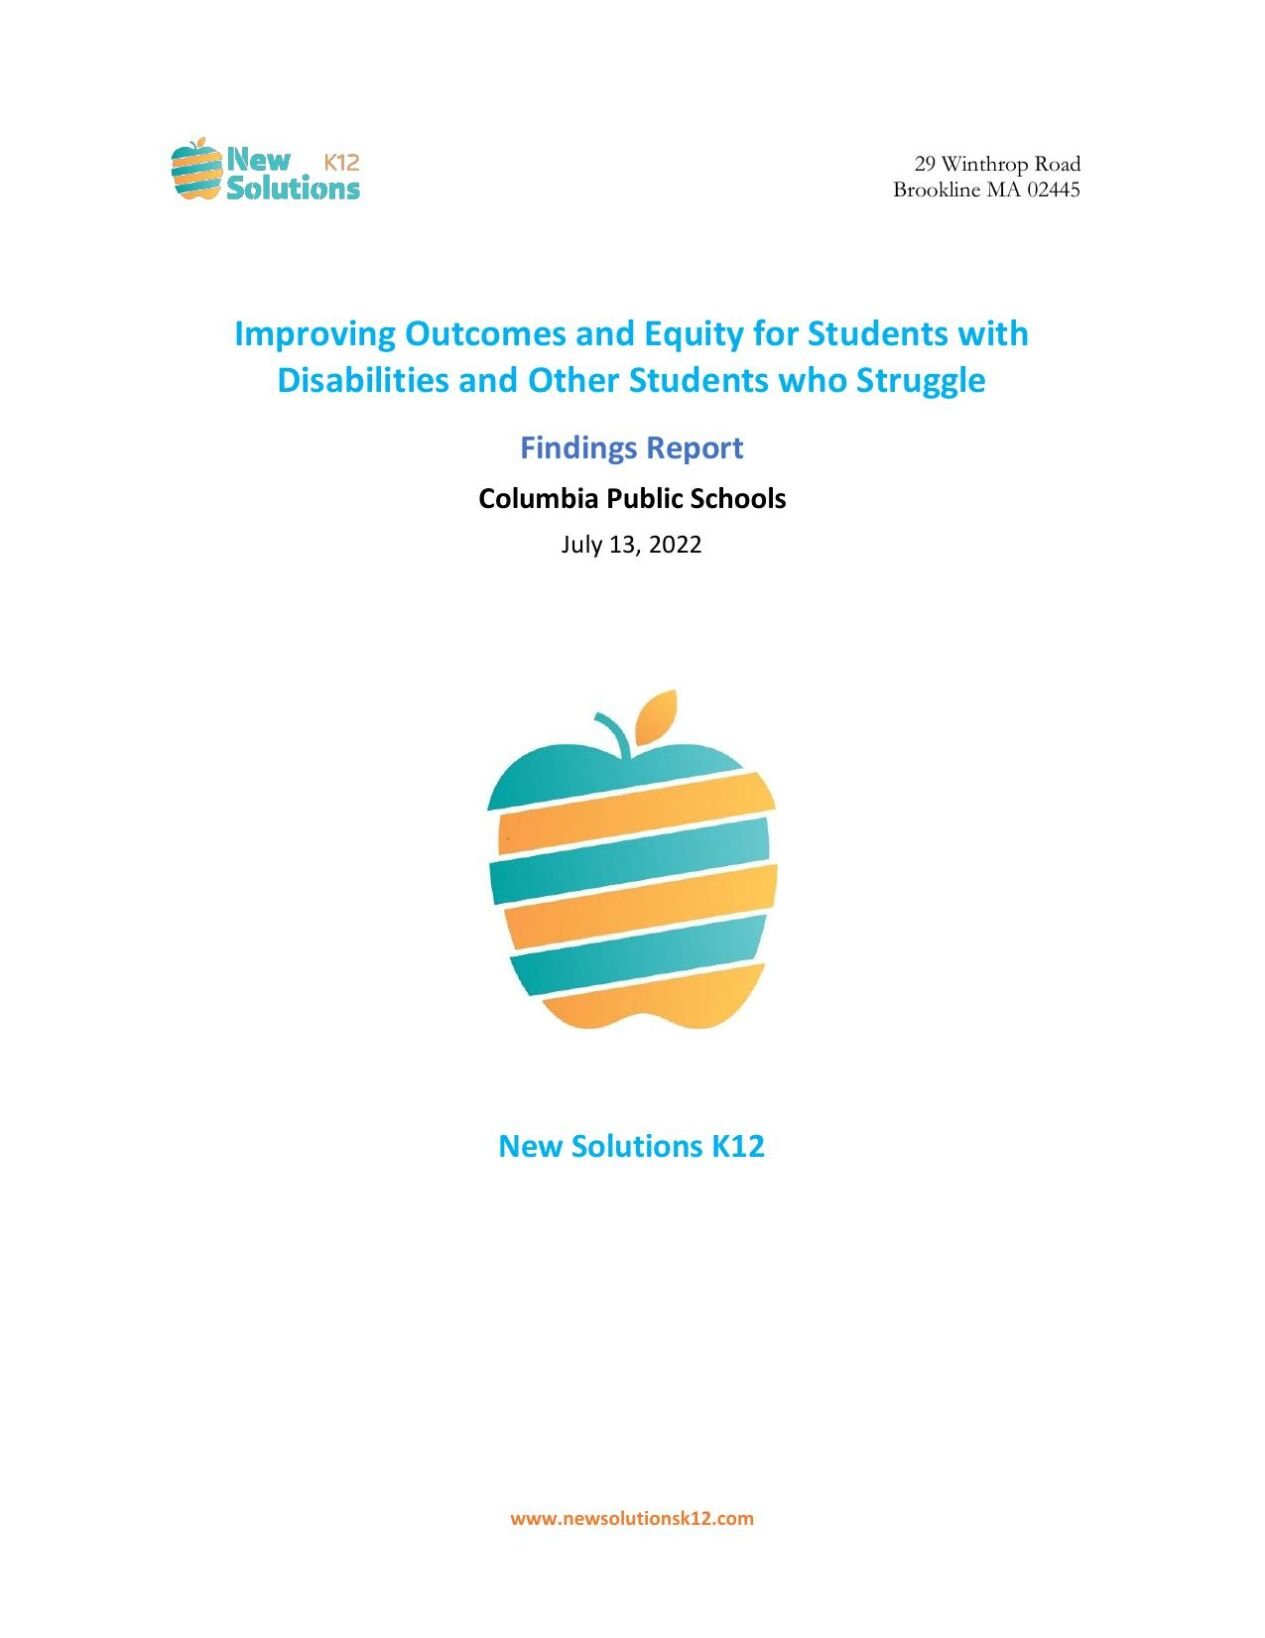 New Solutions K12 Findings Report